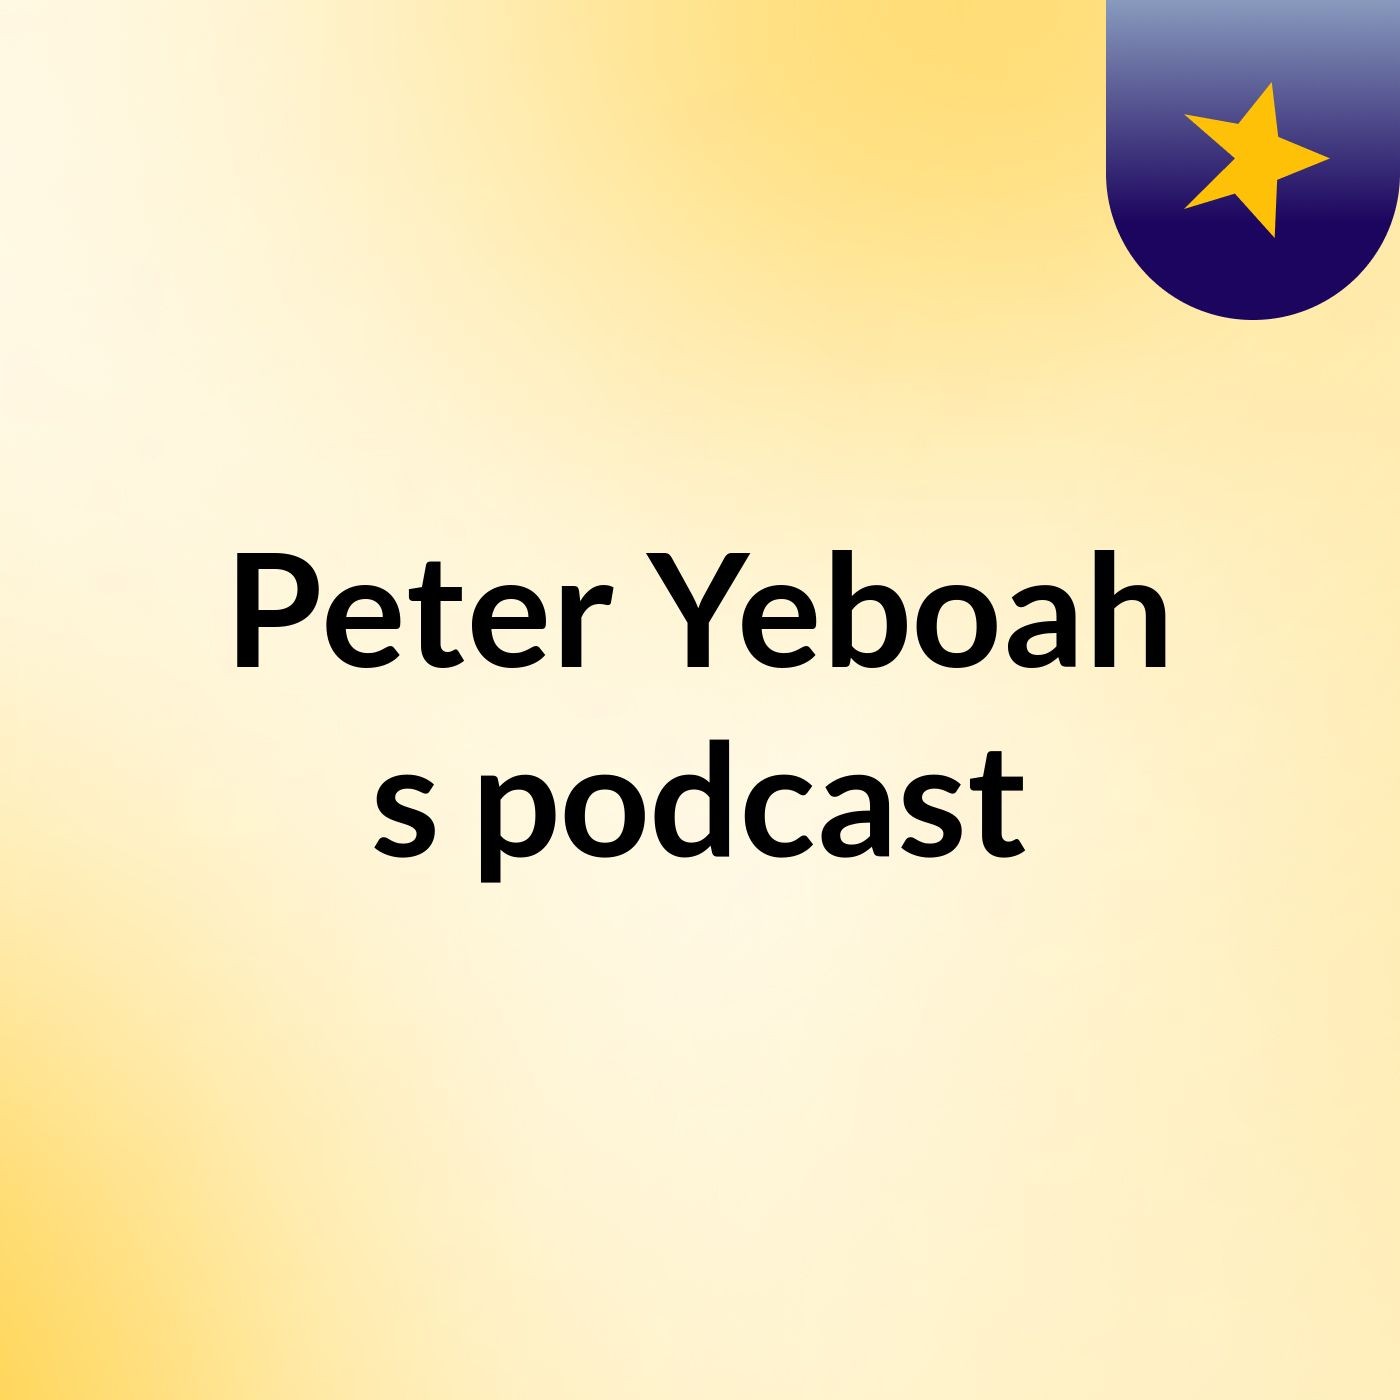 Peter Yeboah's podcast